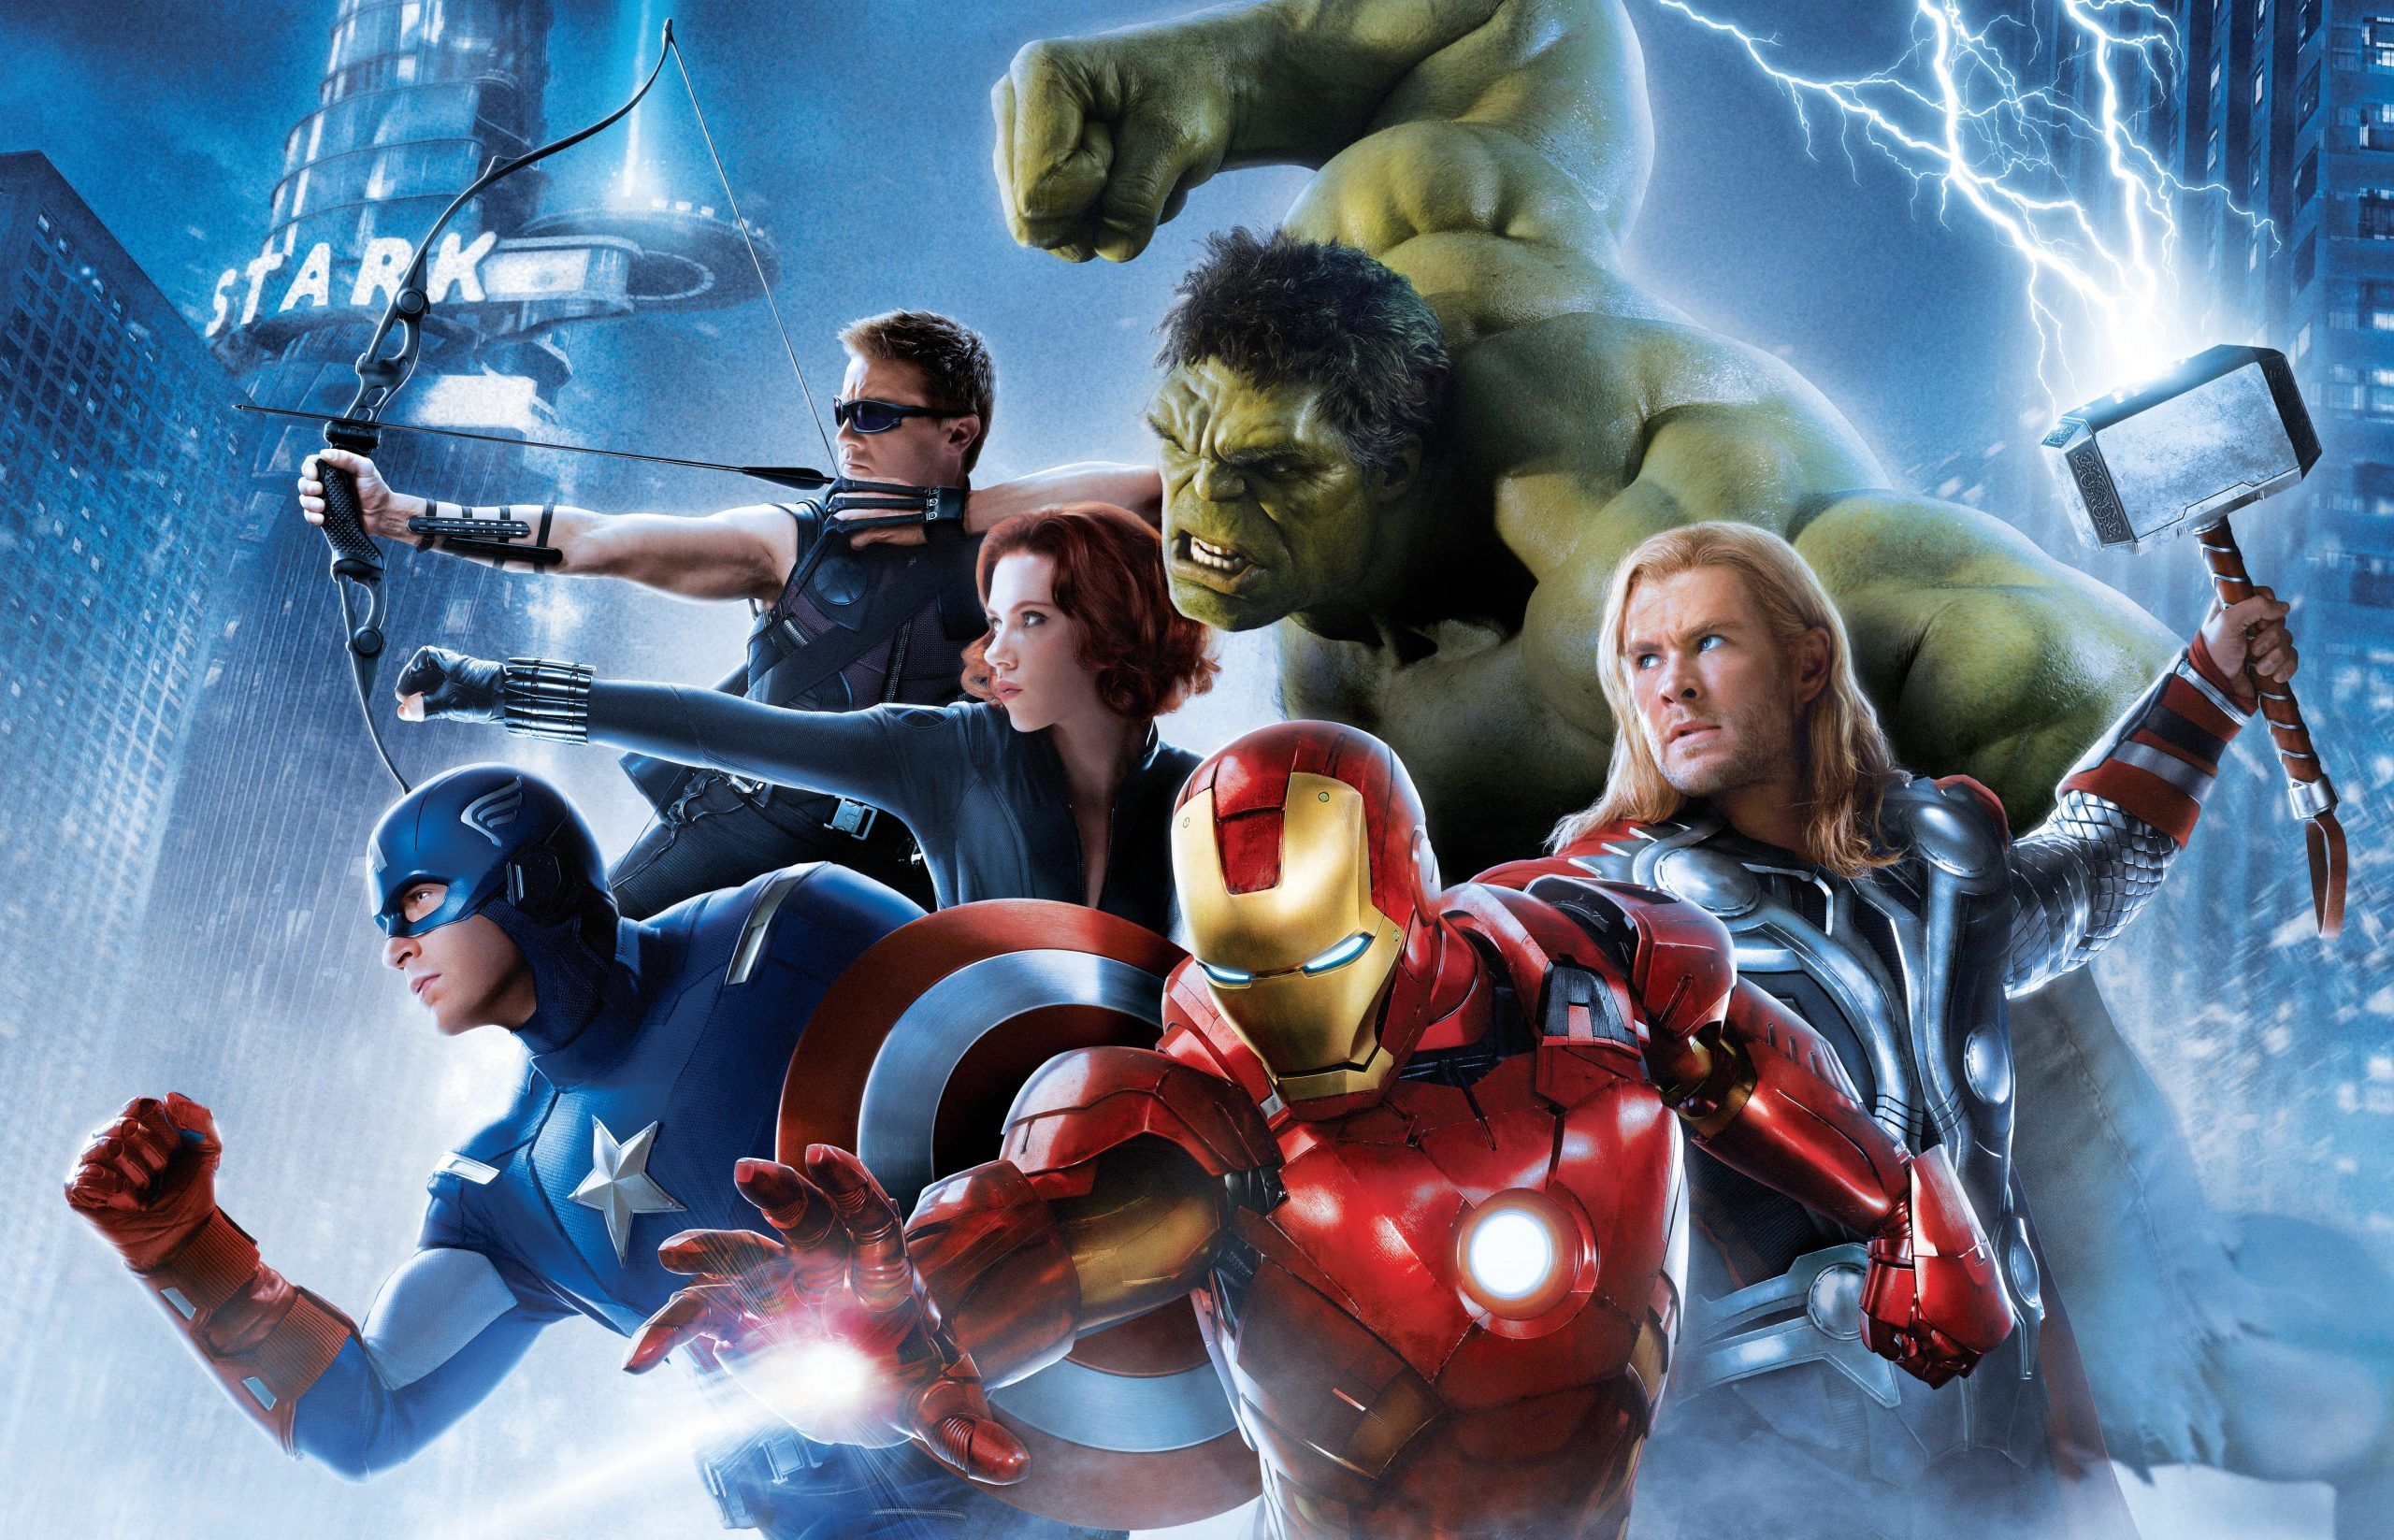 The Avengers is a 2012 superhero film directed by Joss Whedon. - Marvel